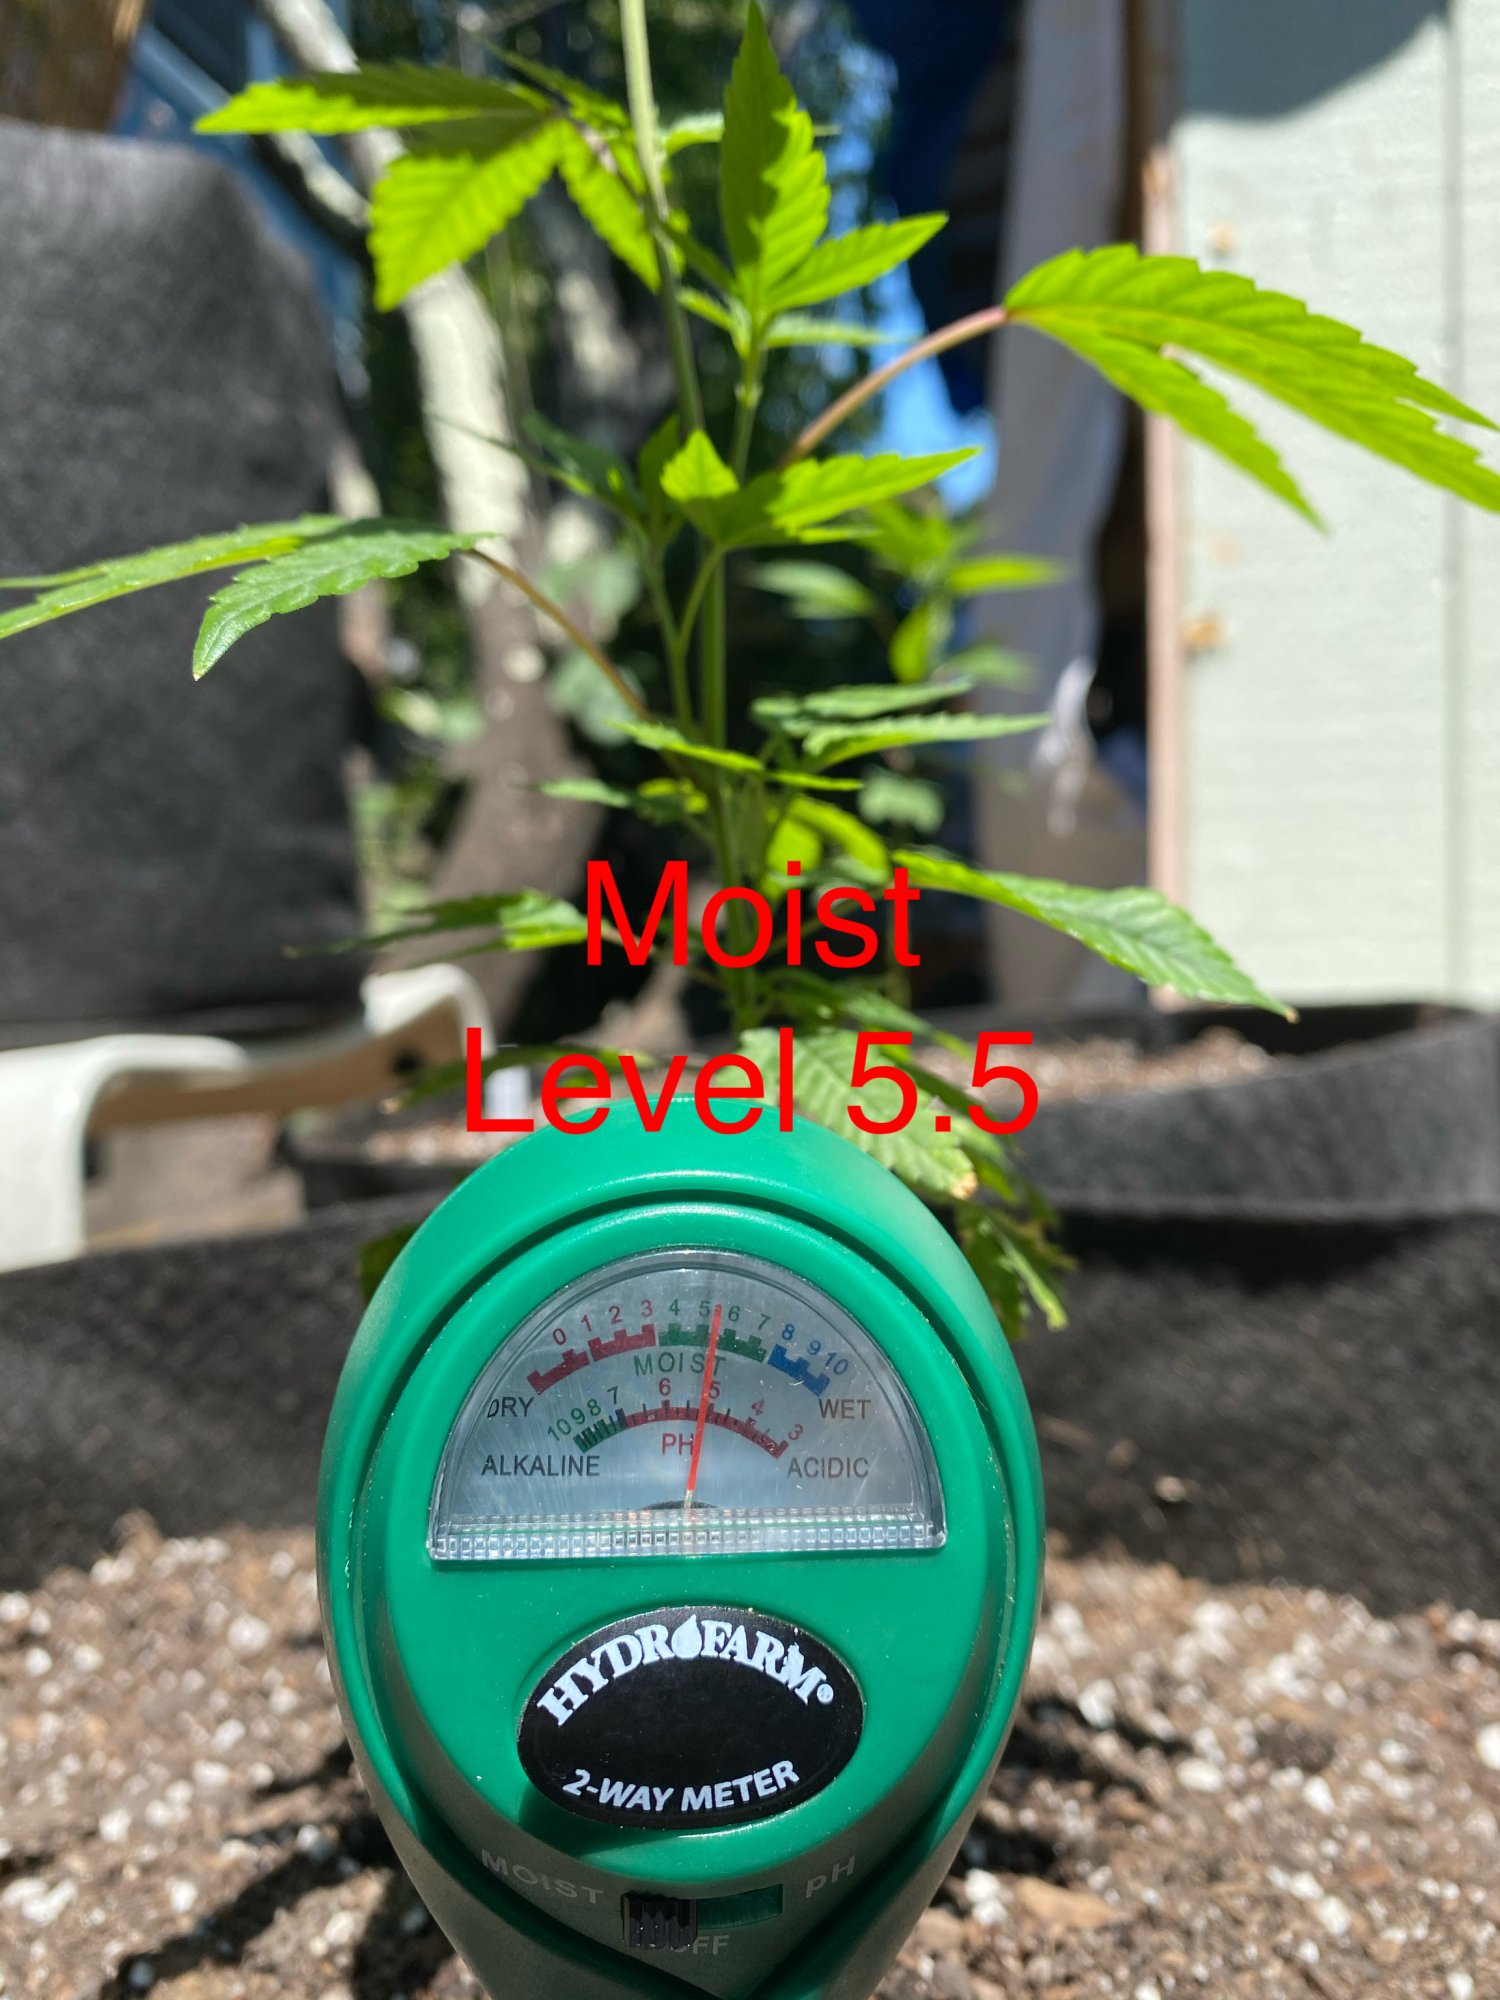 New outdoor grower looking for advice 3